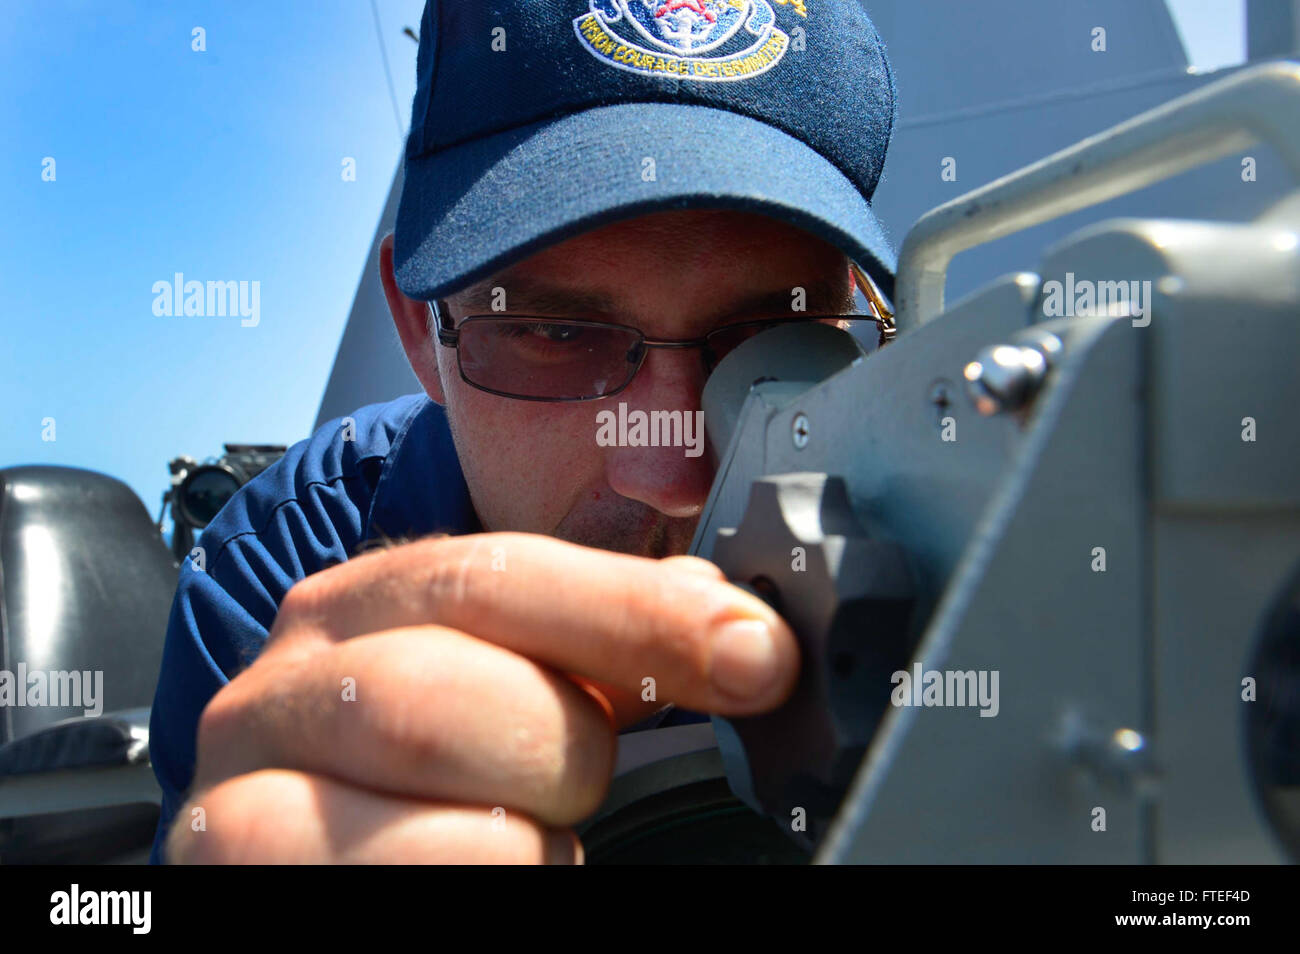 140622-N-AT101-003  INDIAN OCEAN (June 22, 2014) – Quarter Master 1st Class Shawn Dekle, assigned to the guided-missile destroyer USS Nitze (DDG 94), looks through telescopic alidade on the bridge wing as the ship navigates the Indian Ocean.  Nitze, homeported in Norfolk, Va., is conducting naval operations in the U.S. 6th Fleet area of operations in support of U.S. national security interests in Africa. (U.S. Navy photo by Mass Communication Specialist 1st Class Maddelin Angebrand)  Join the conversation on Twitter ( https://twitter.com/naveur navaf )  follow us on Facebook ( https://www.face Stock Photo